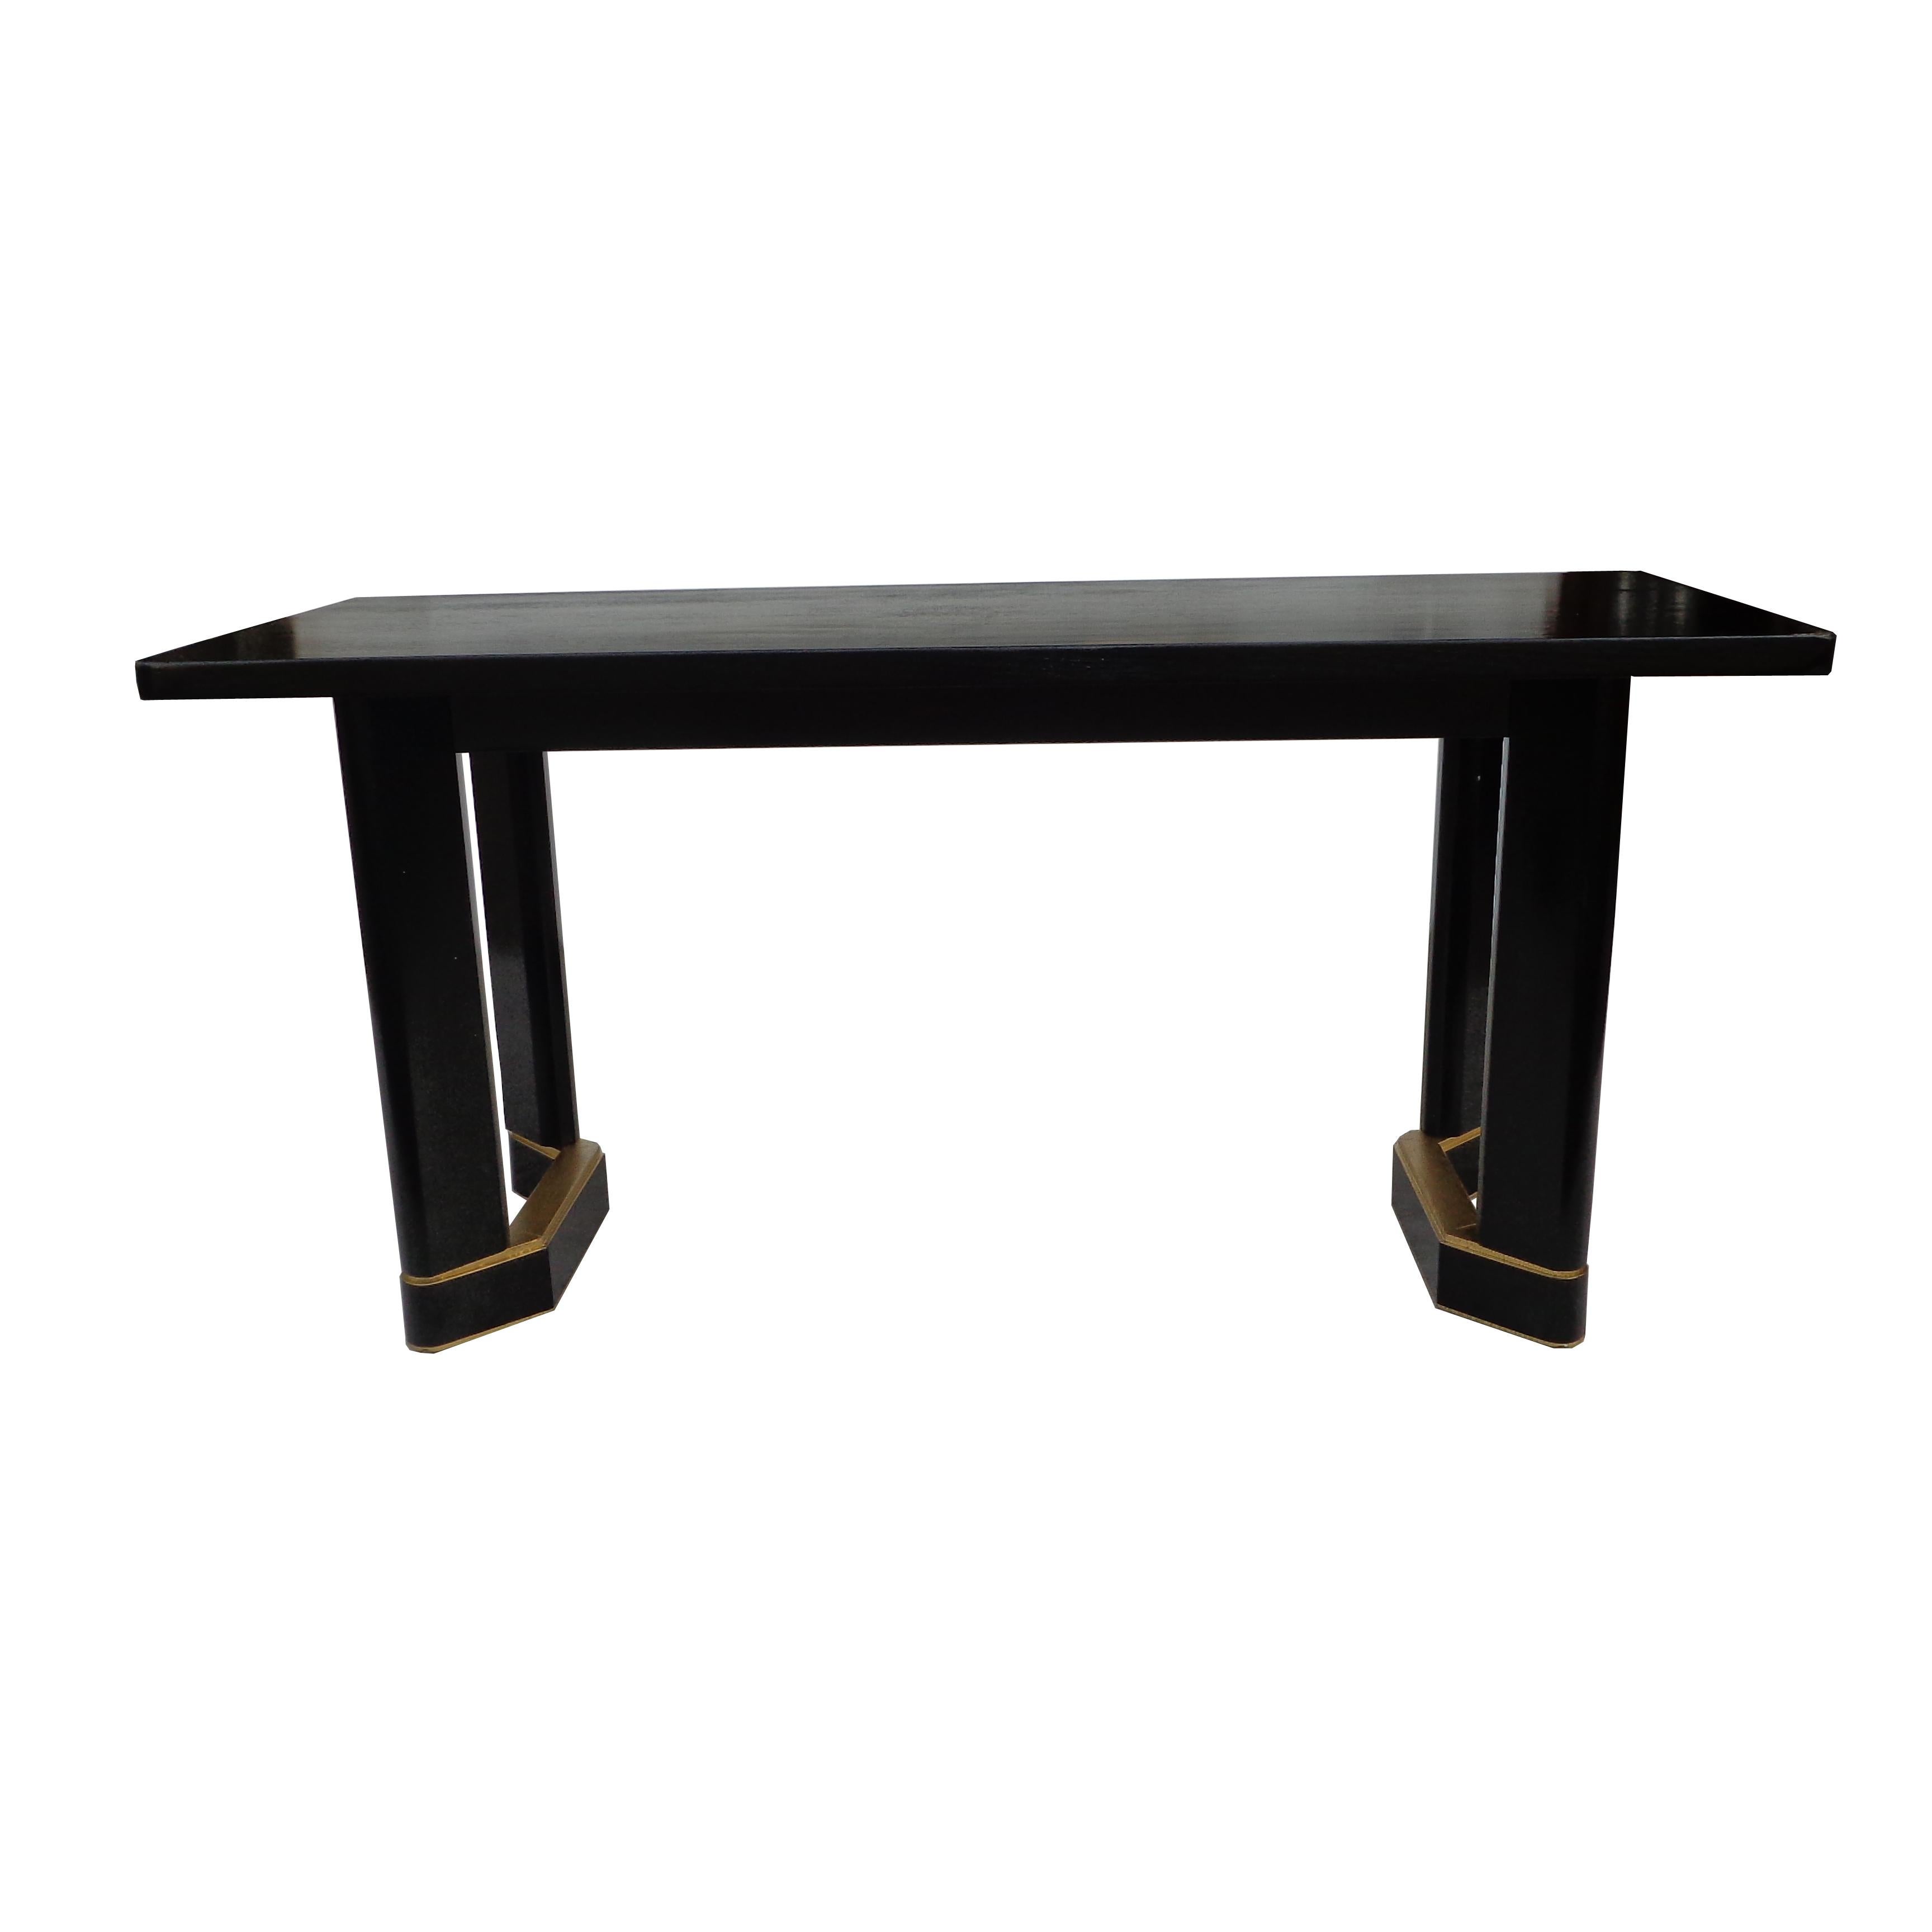 Mid-20th Century Art Deco Style Console Table For Sale